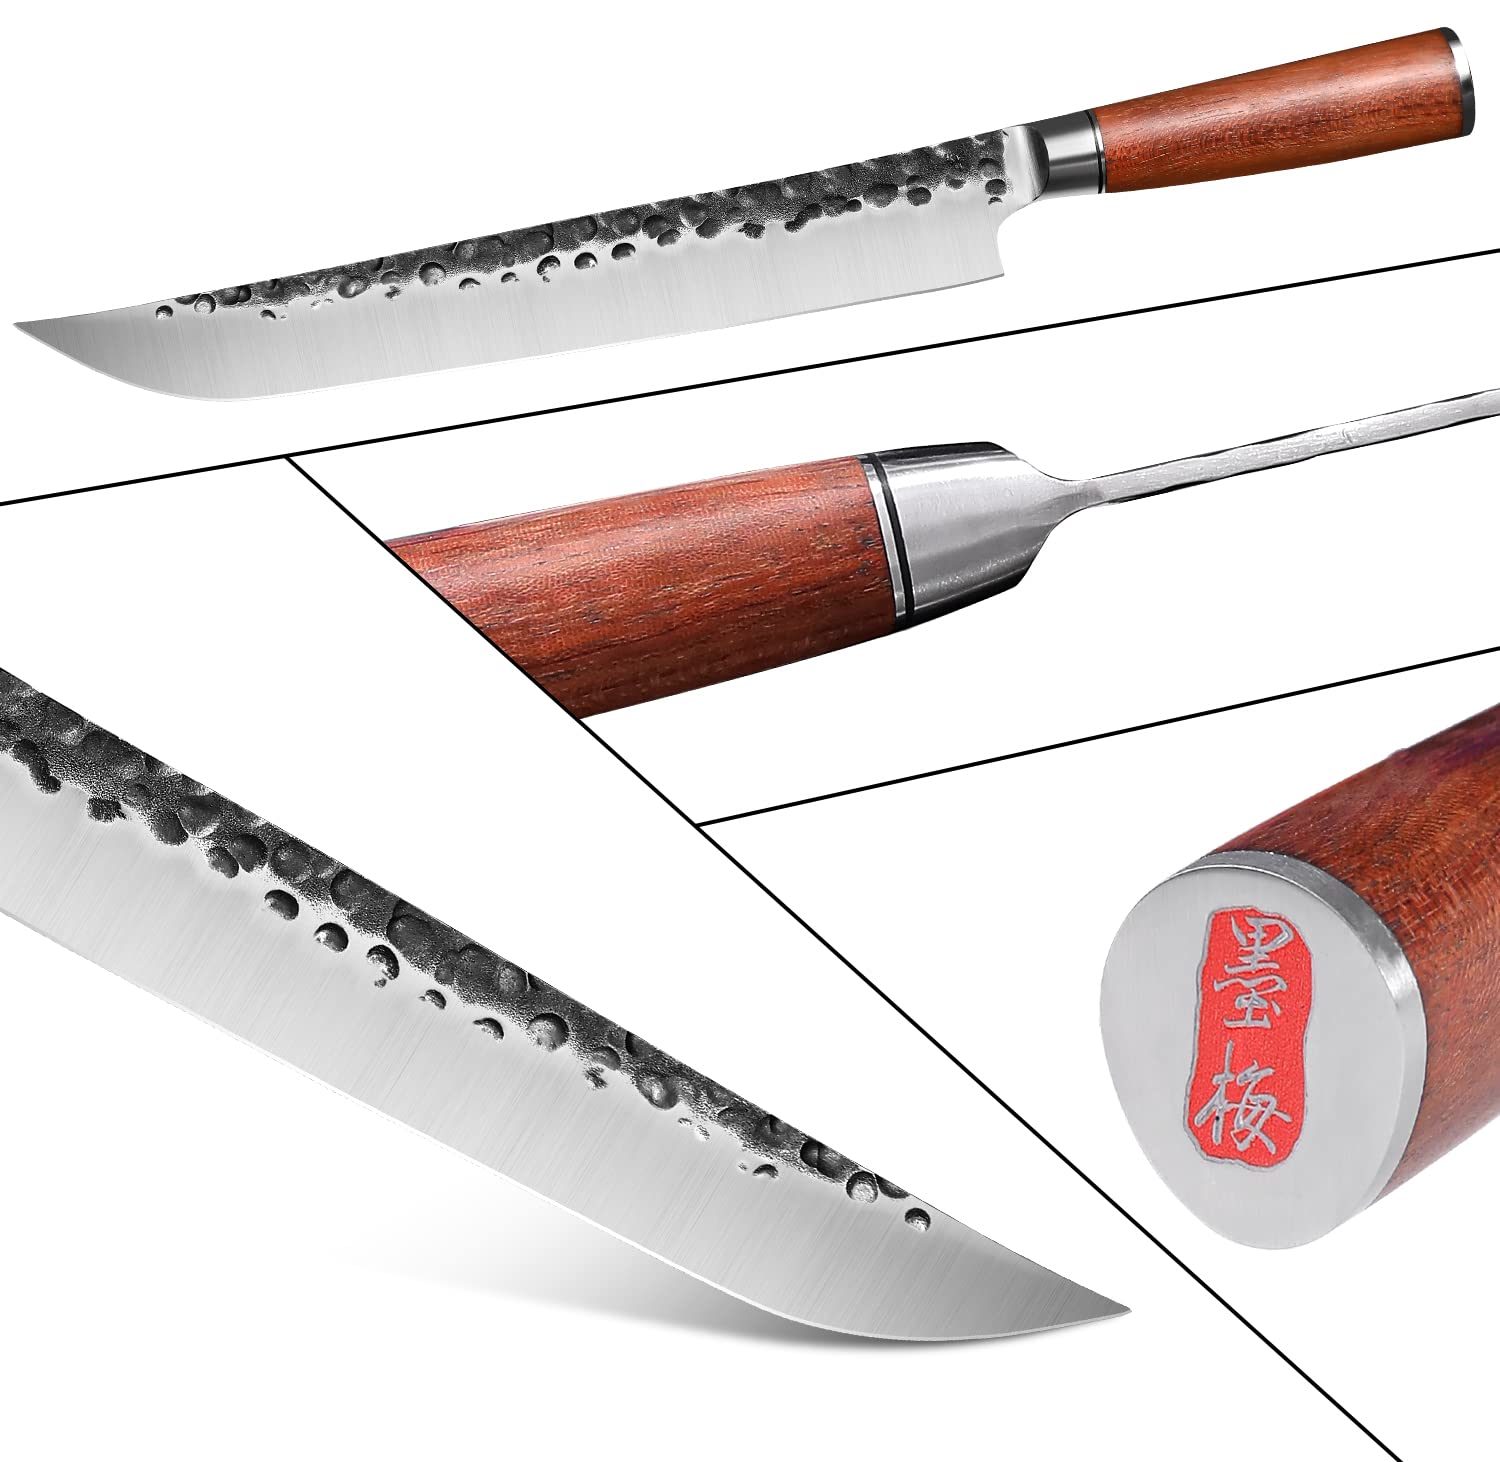 Ink Plums 10.5 Inch Carving Knife, Hand Forged Japanese Butcher Knife For Meat Cuting,Trusted Victorinox Butcher Knife For BBQ,Outdoor Camping